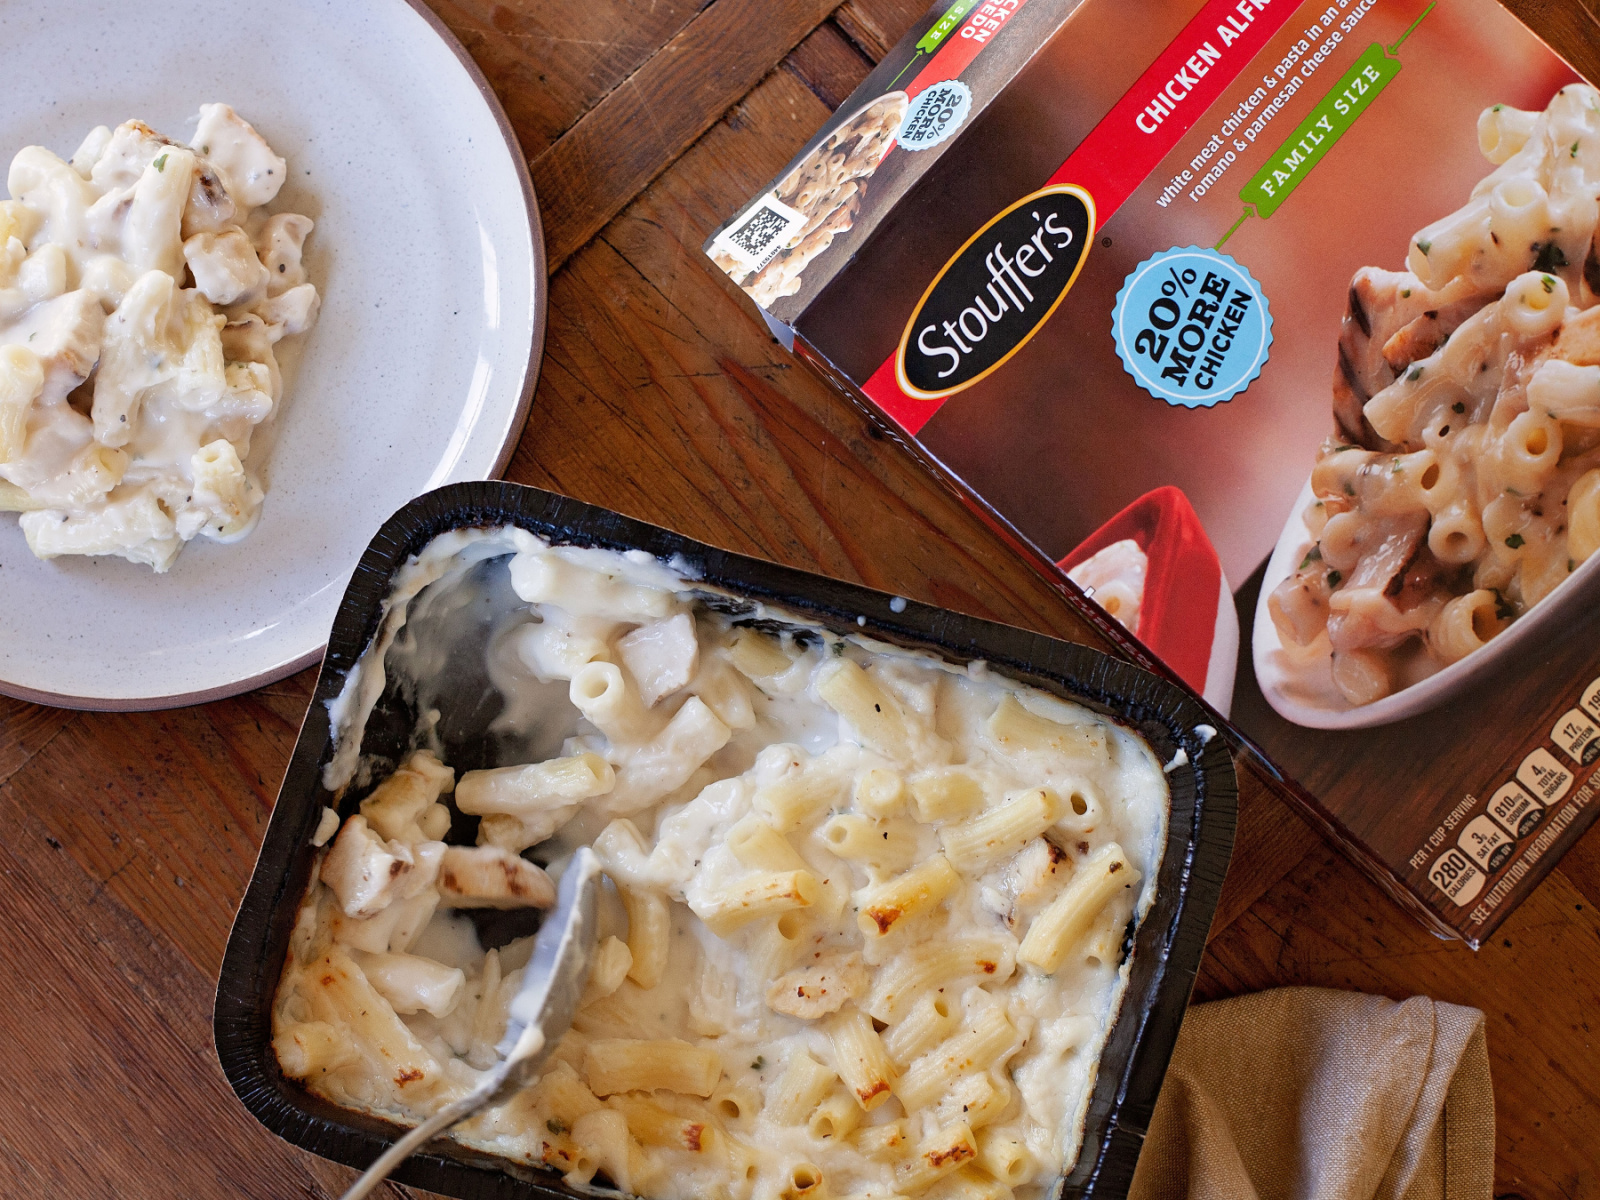 Stouffer’s Family Size Entrees Only $5.99 At Publix